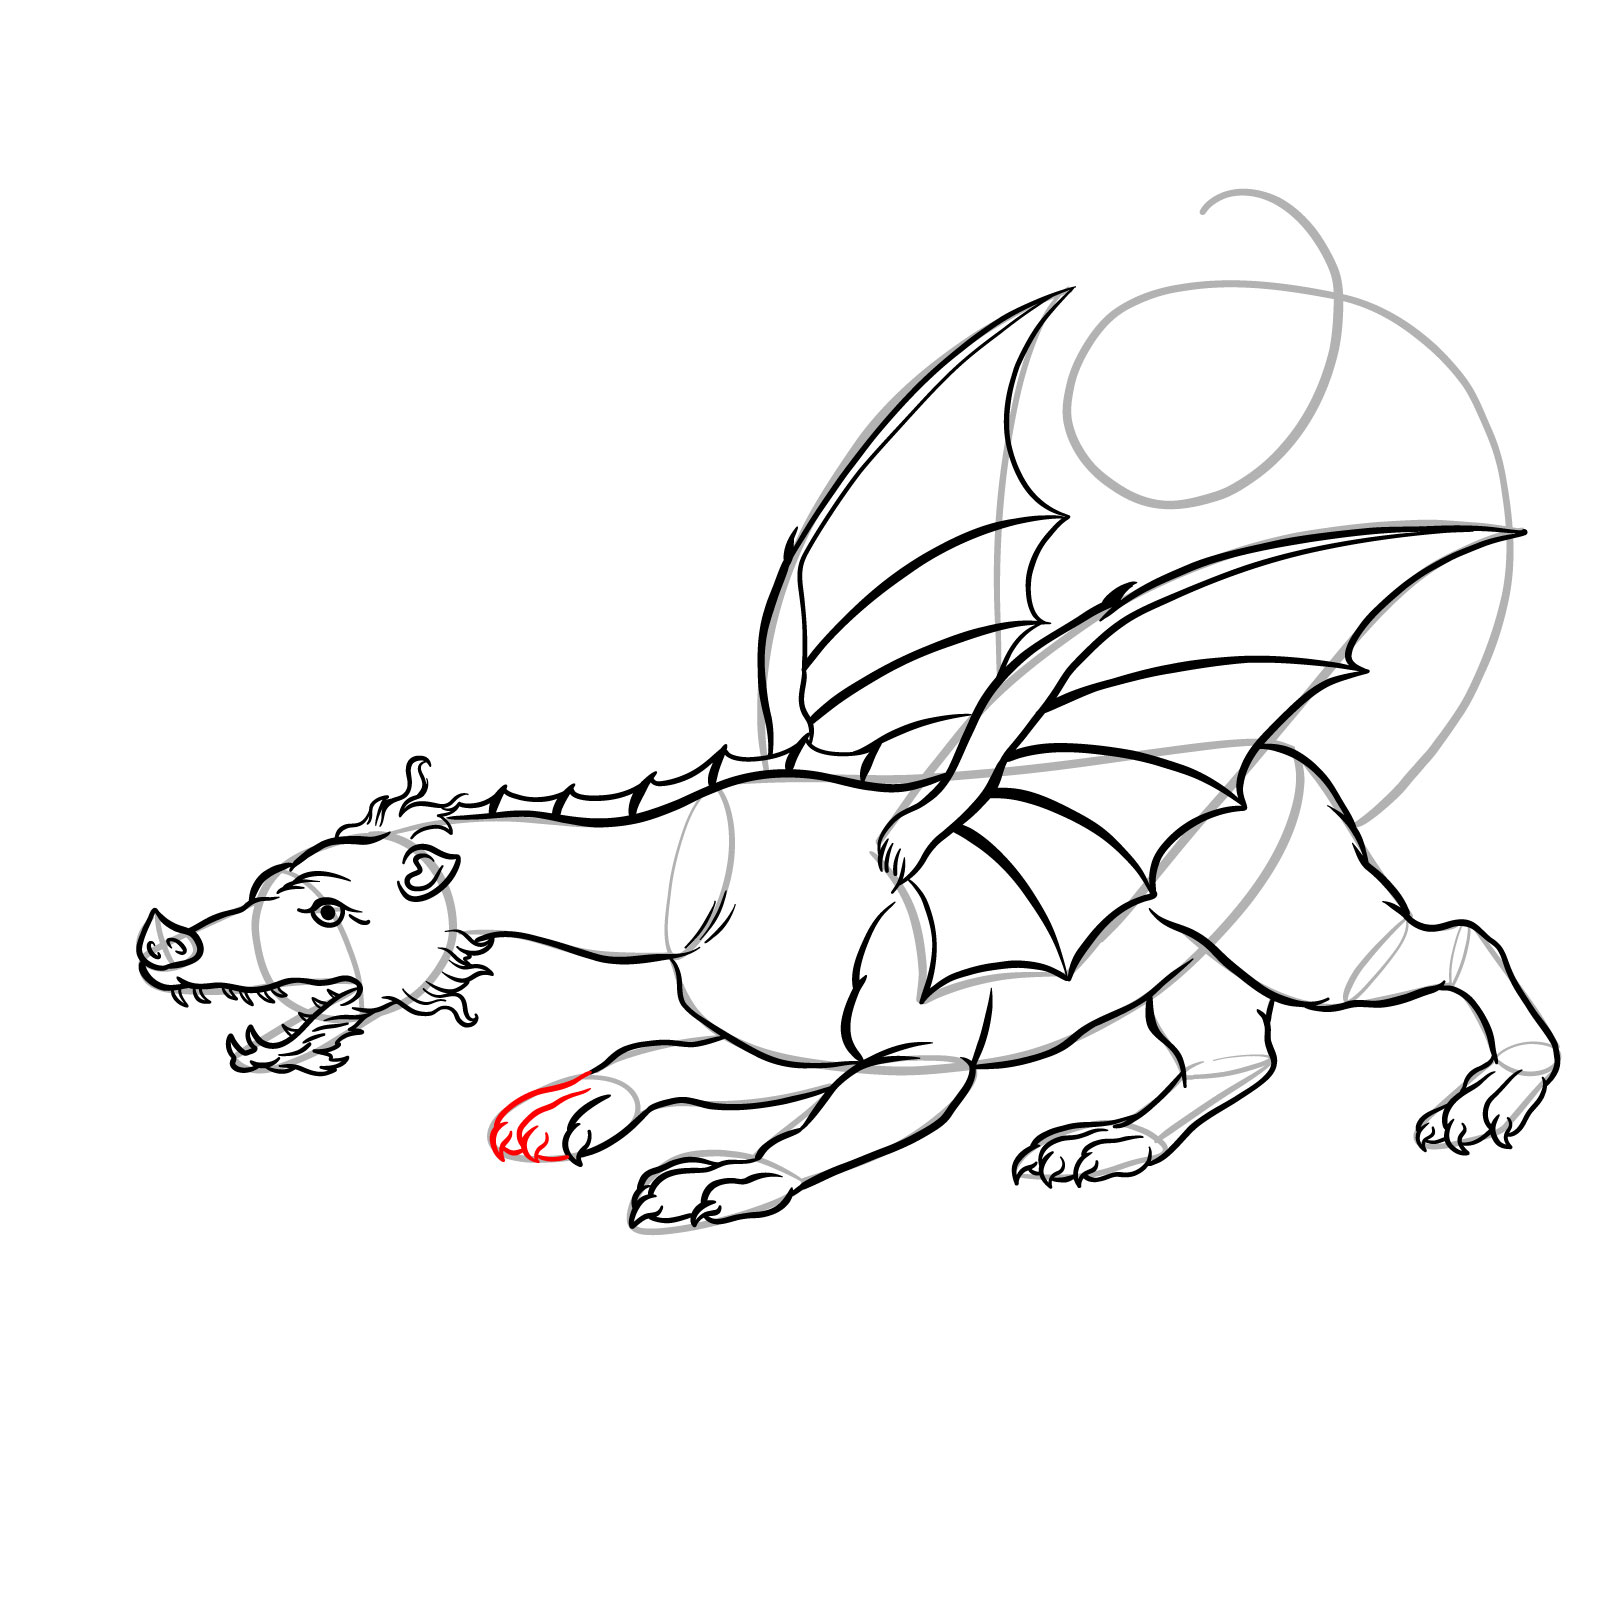 How to draw a classic European dragon - step 39